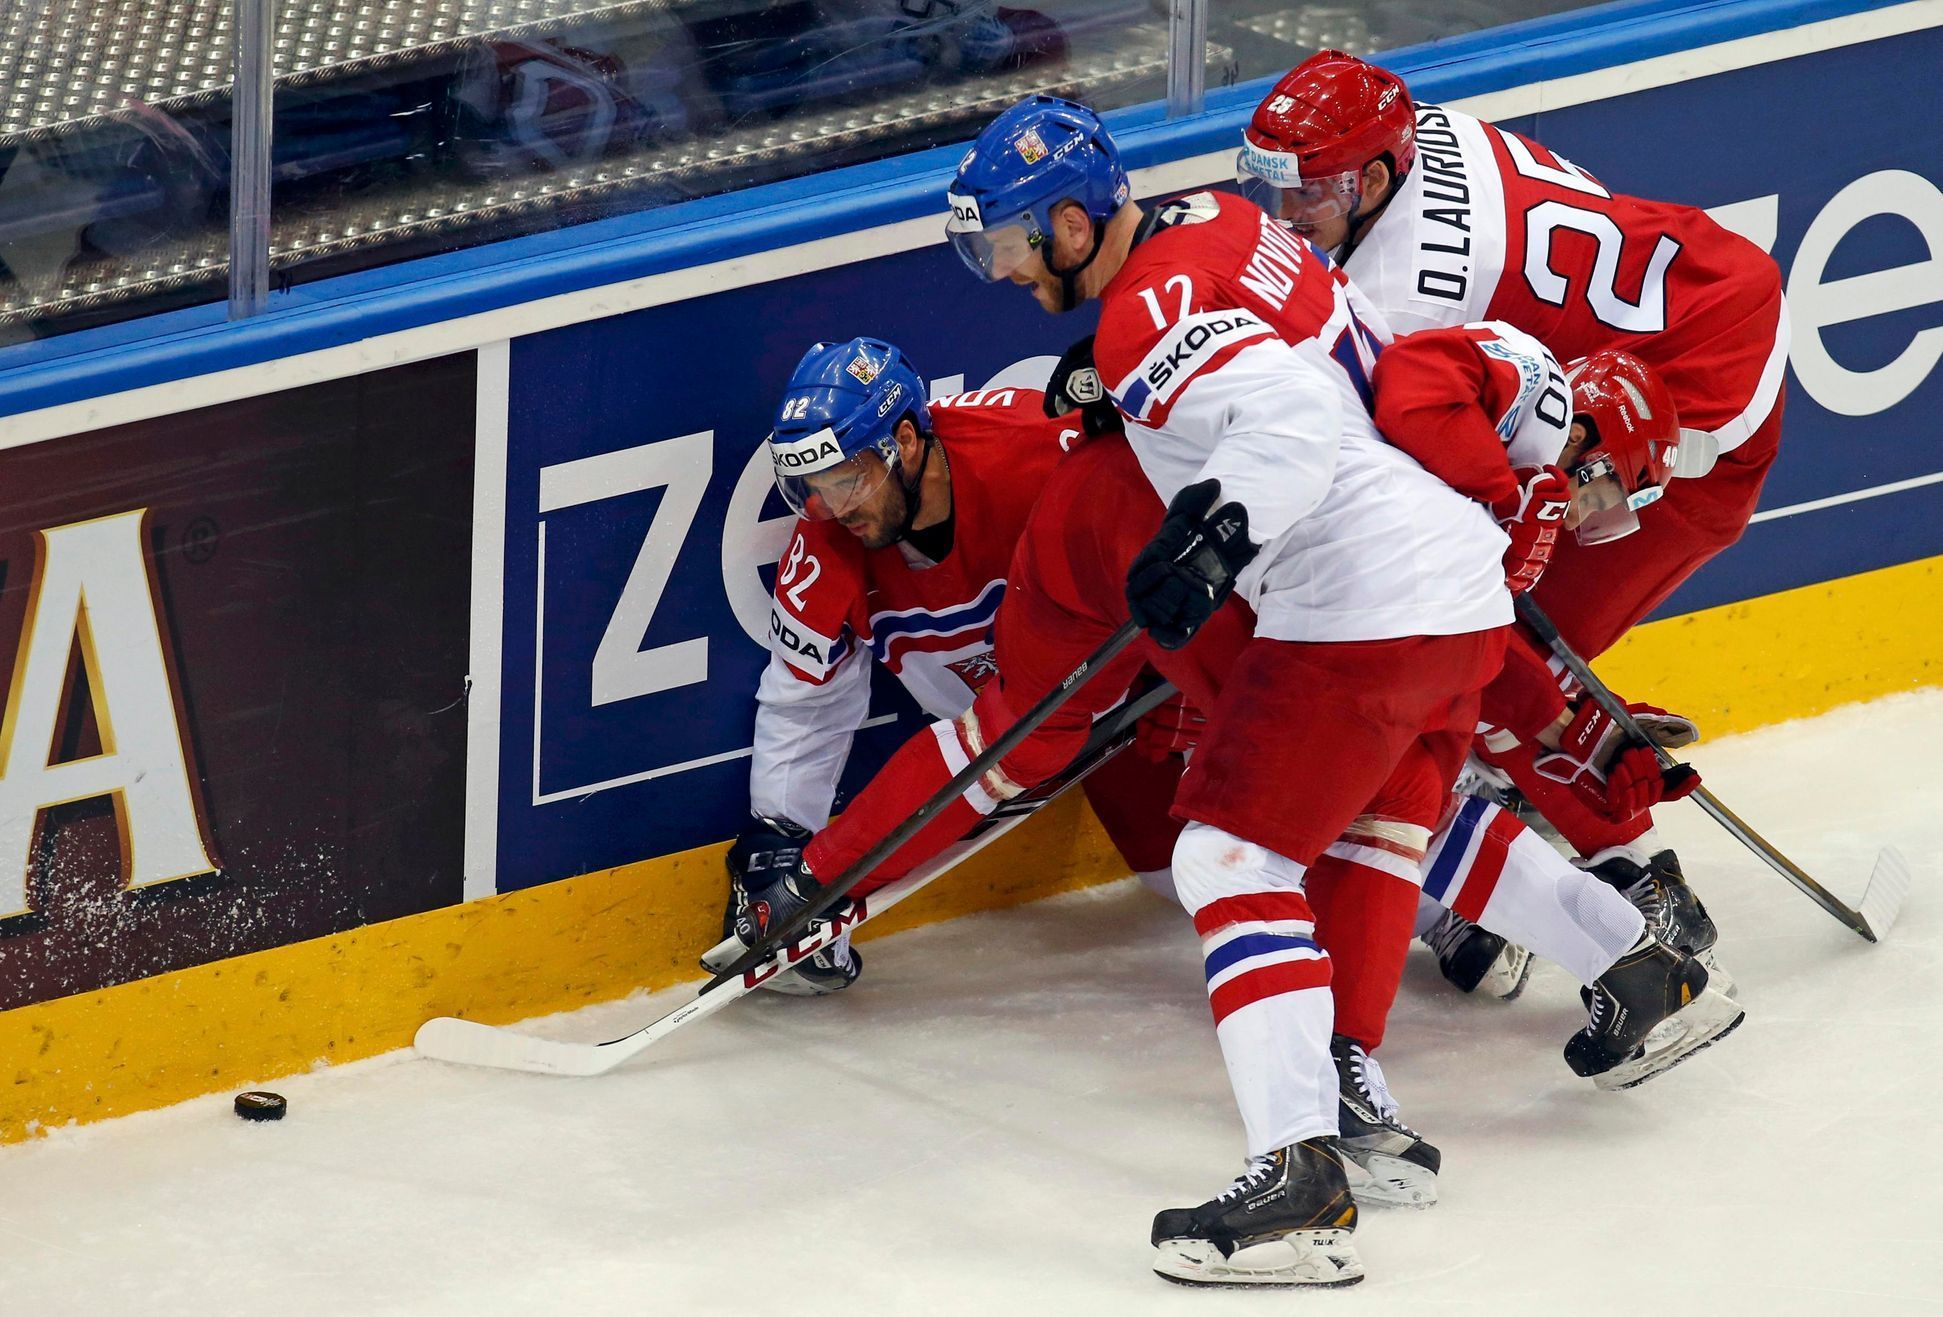 Vondrka and Novotny of the Czech Republic battle for the puck with Denmark's Lauridsen Jesper Jensen during the second period of their men's ice hockey World Championship Group A game at Chizhovka Are